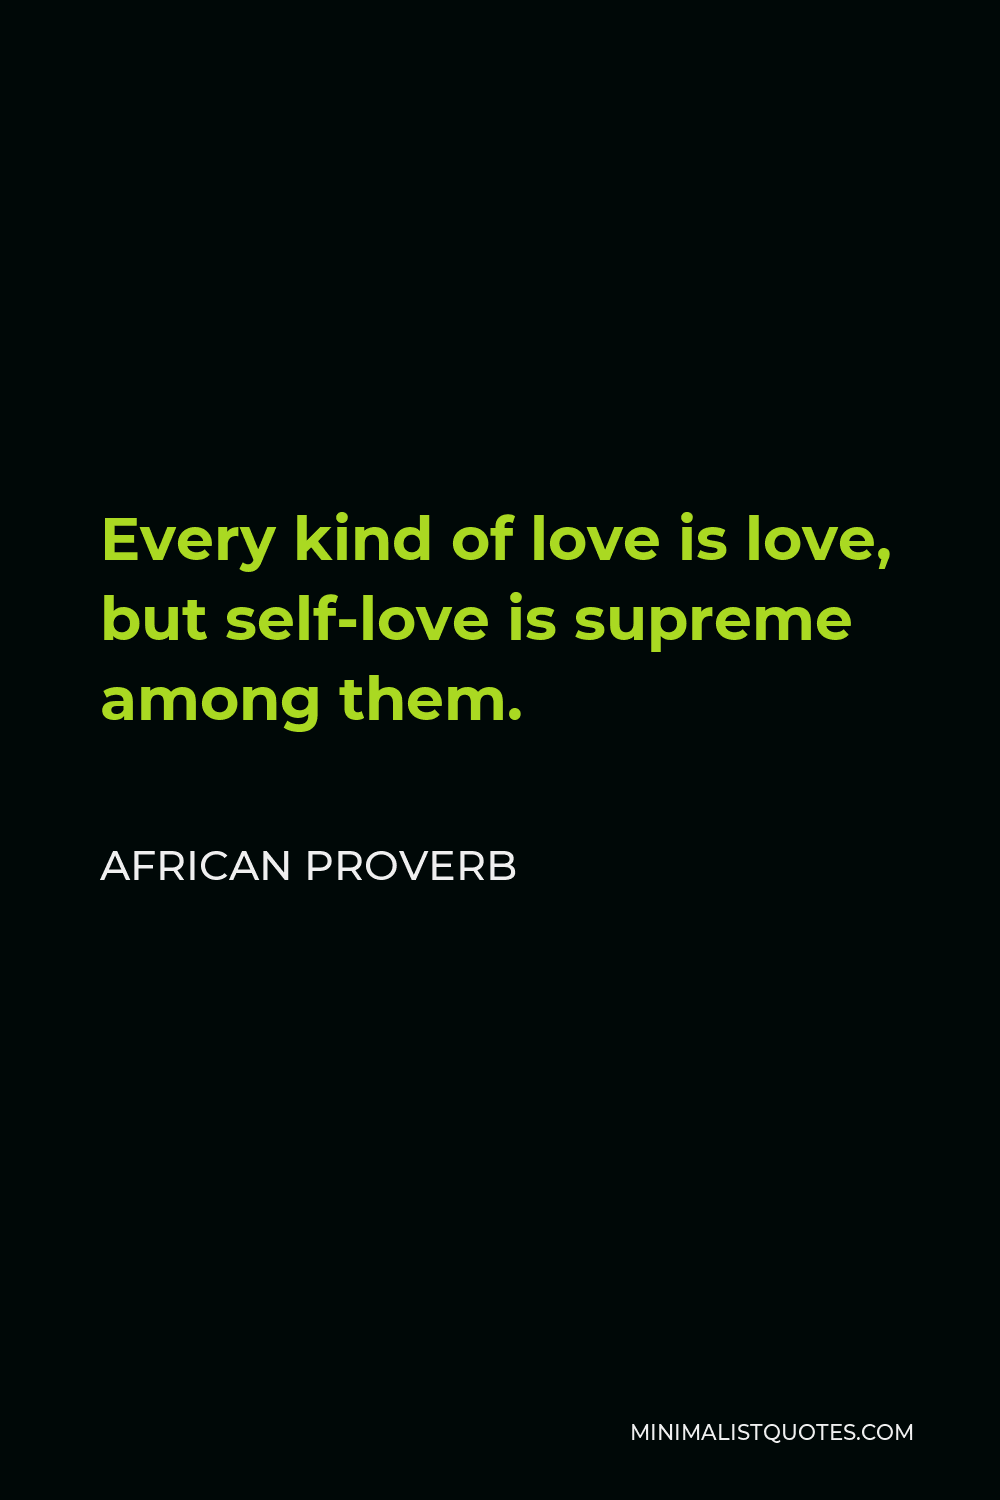 African Proverb Quote - Every kind of love is love, but self-love is supreme among them.